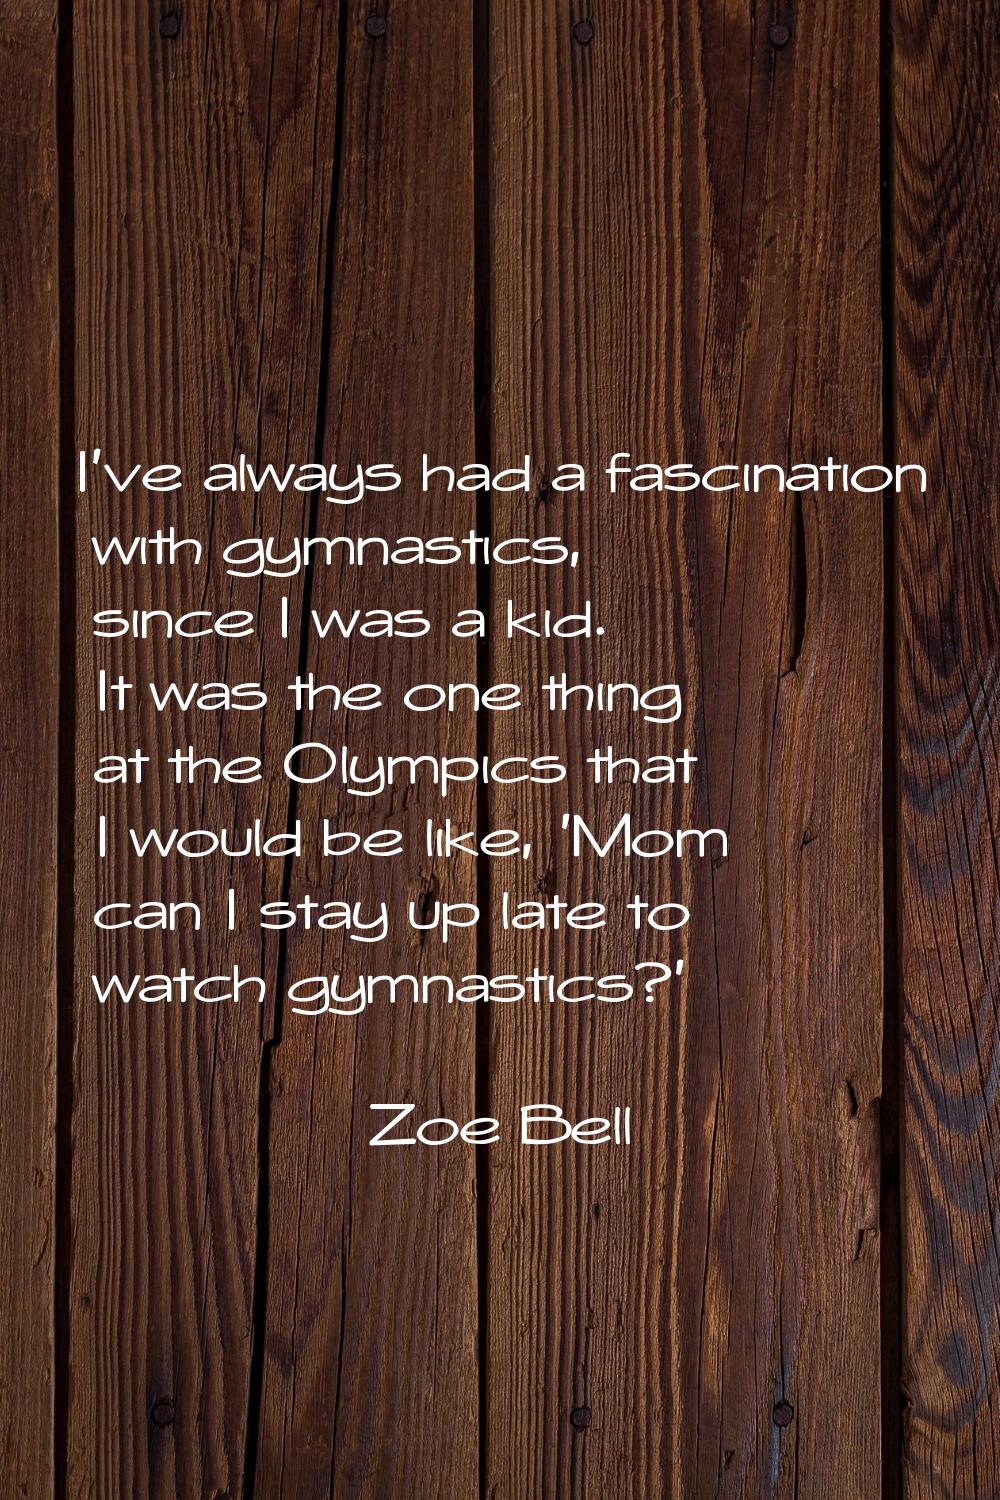 I've always had a fascination with gymnastics, since I was a kid. It was the one thing at the Olymp